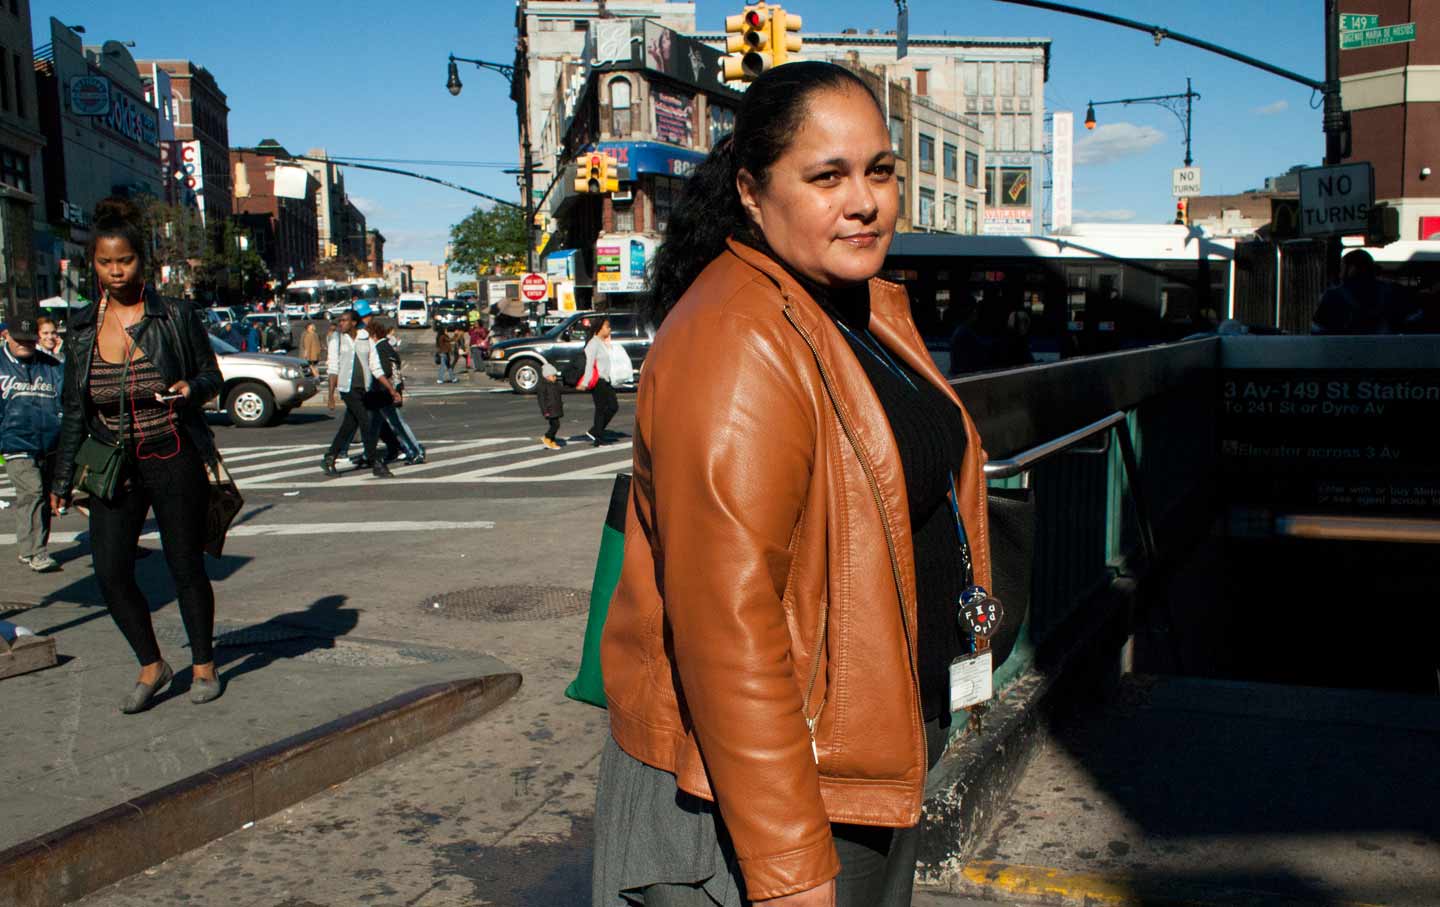 How an Unusual Team Helps Extricate Bronx Residents From NYC’s Justice System